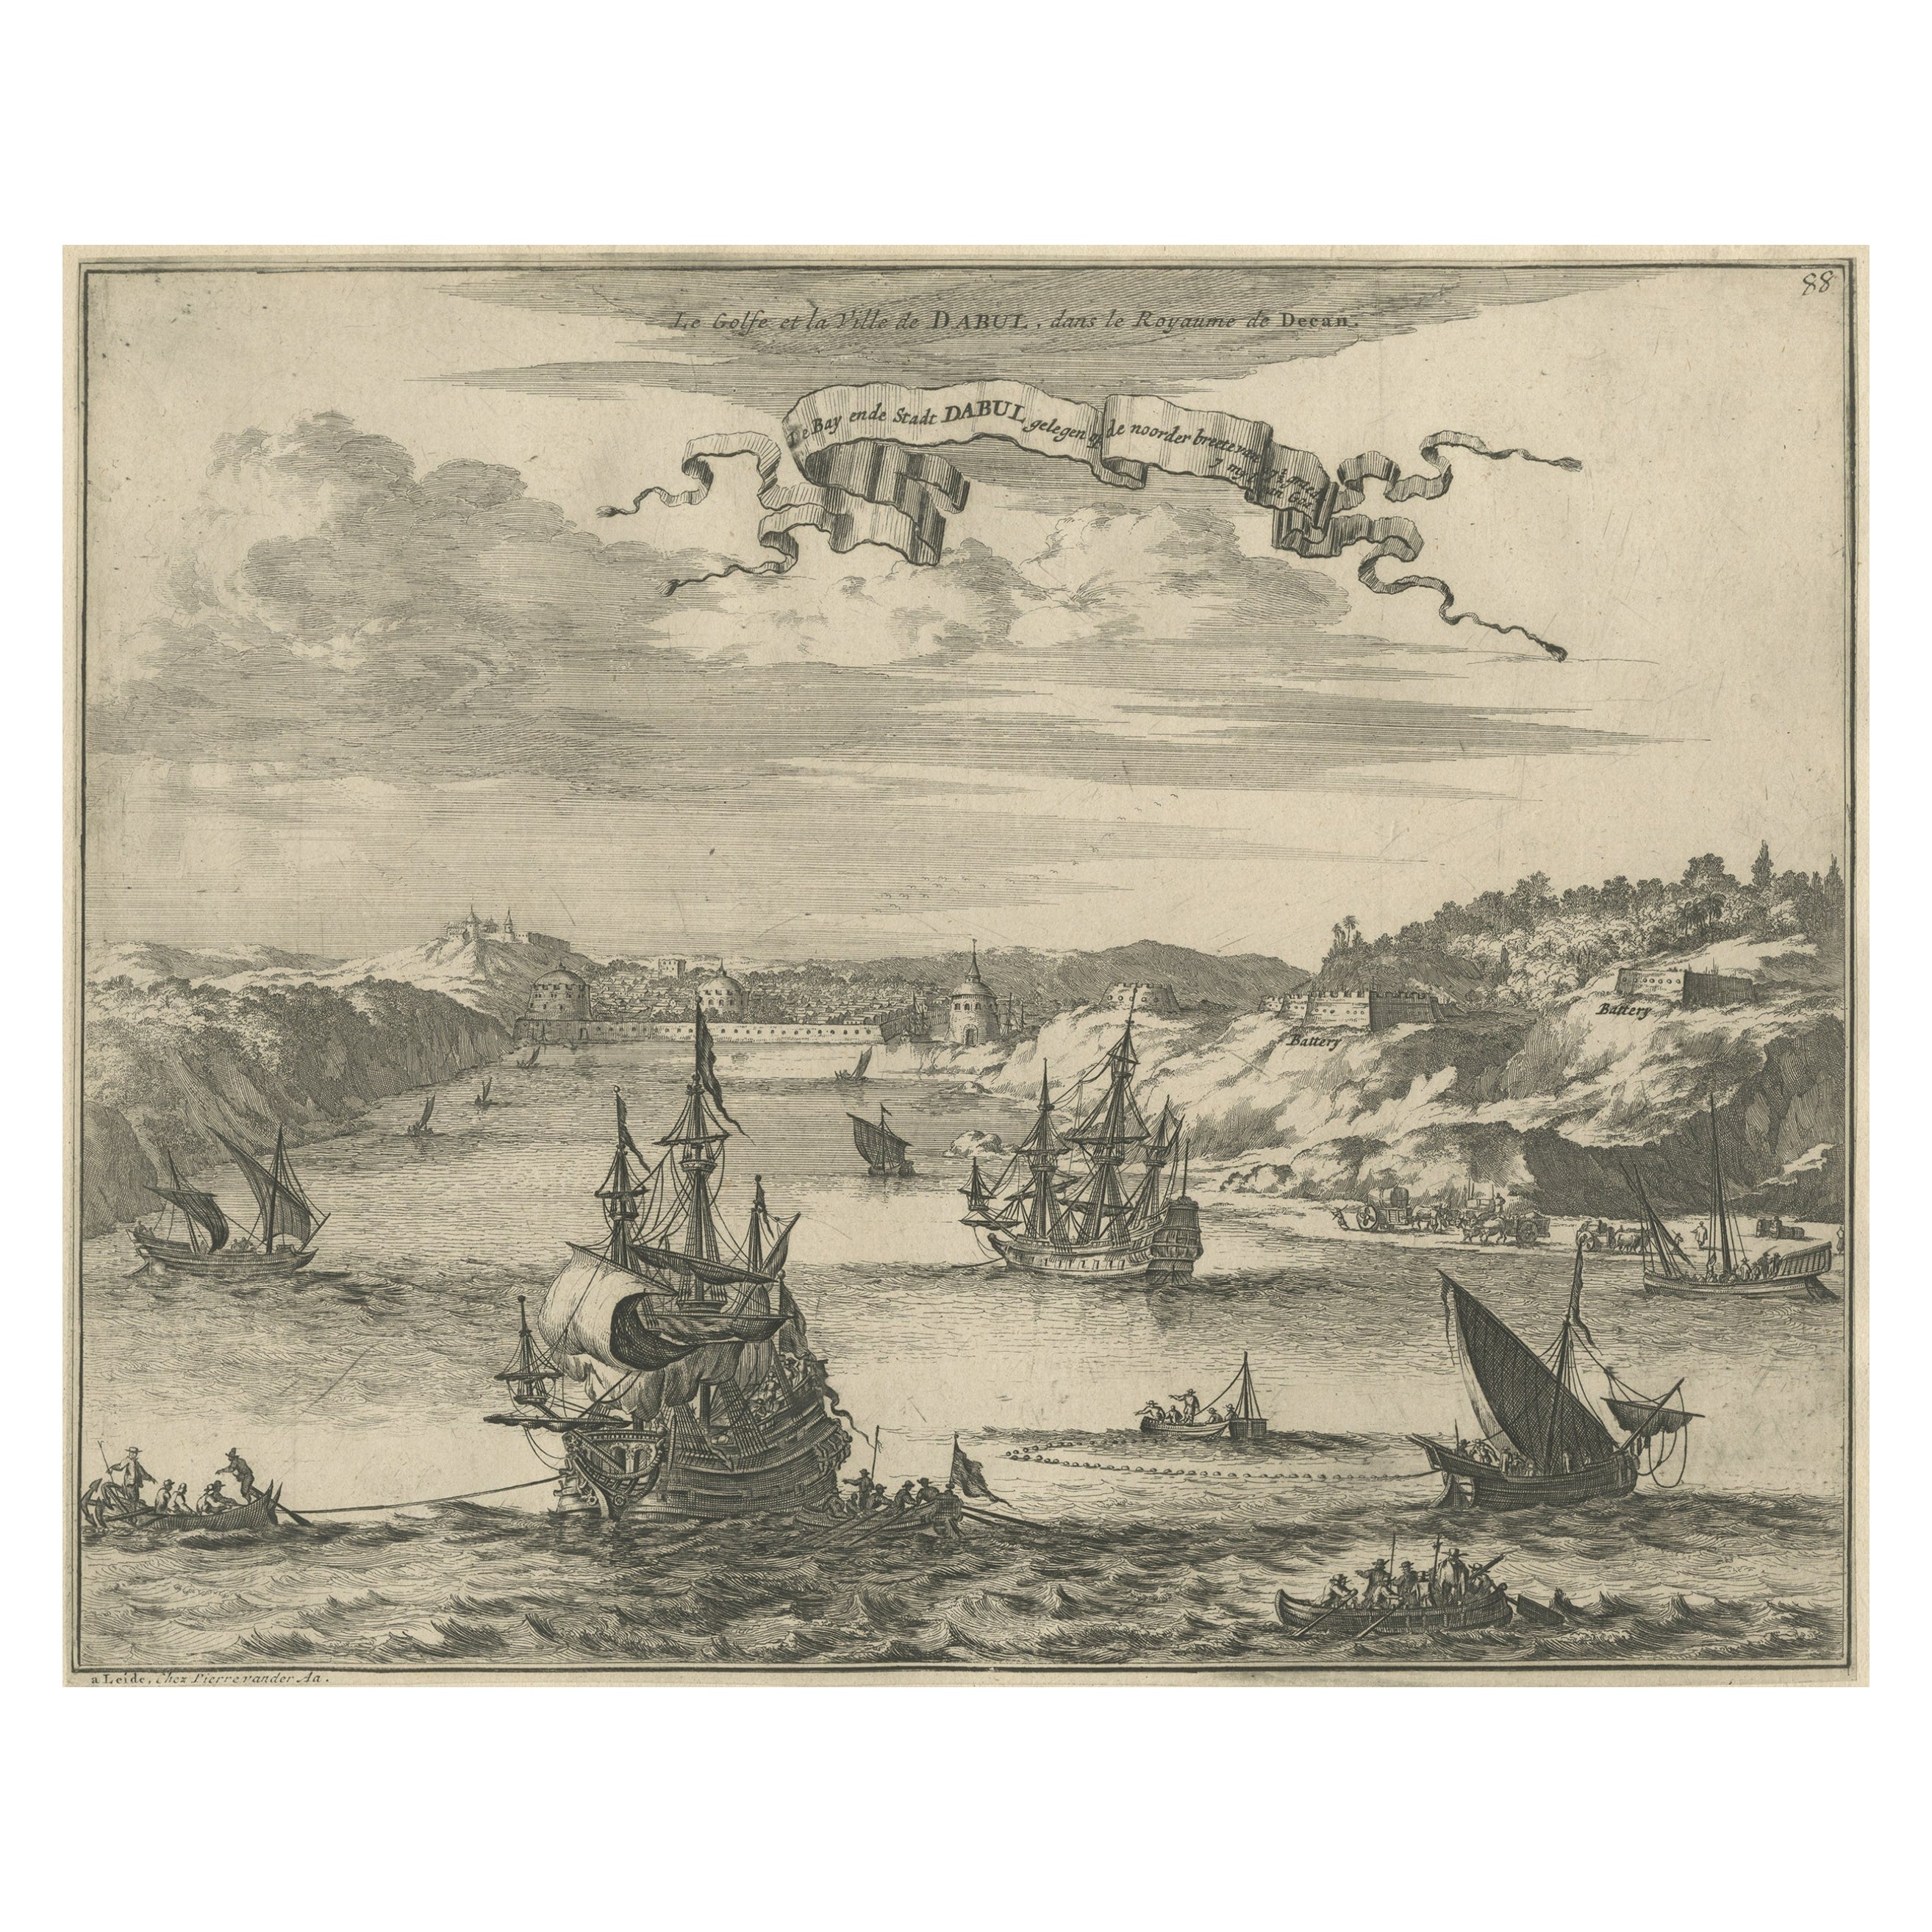 Bird's Eye View of Dabhol as Seen from the Sea, North of Goa, India, 1727